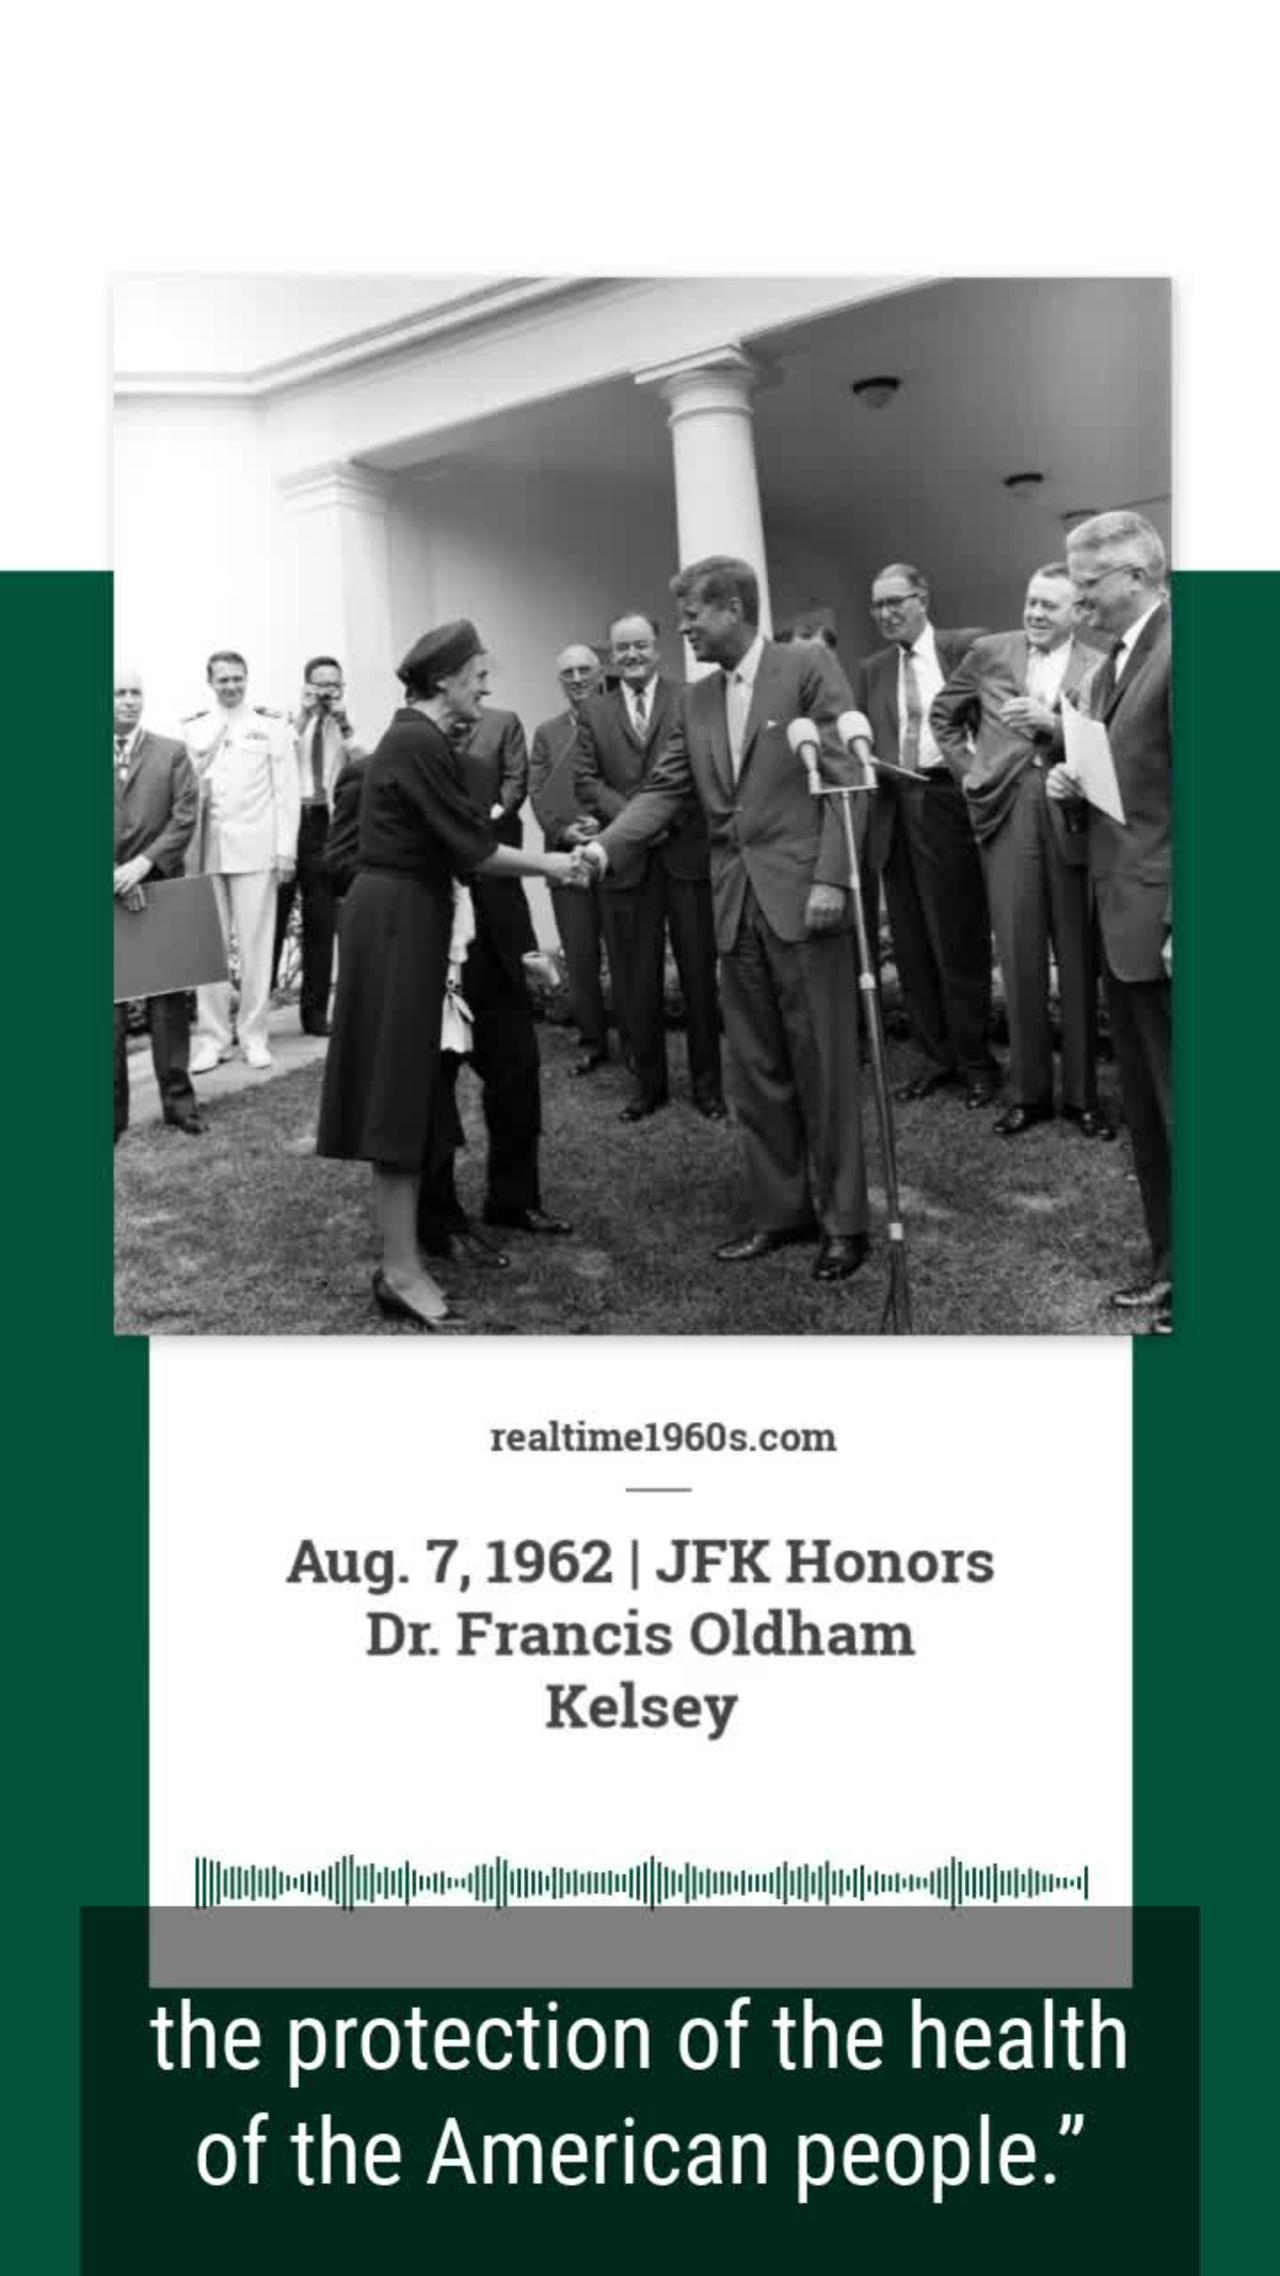 Aug. 7, 1962 - JFK Presents Dr. Francis O. Kelsey with Award for Distinguished Service